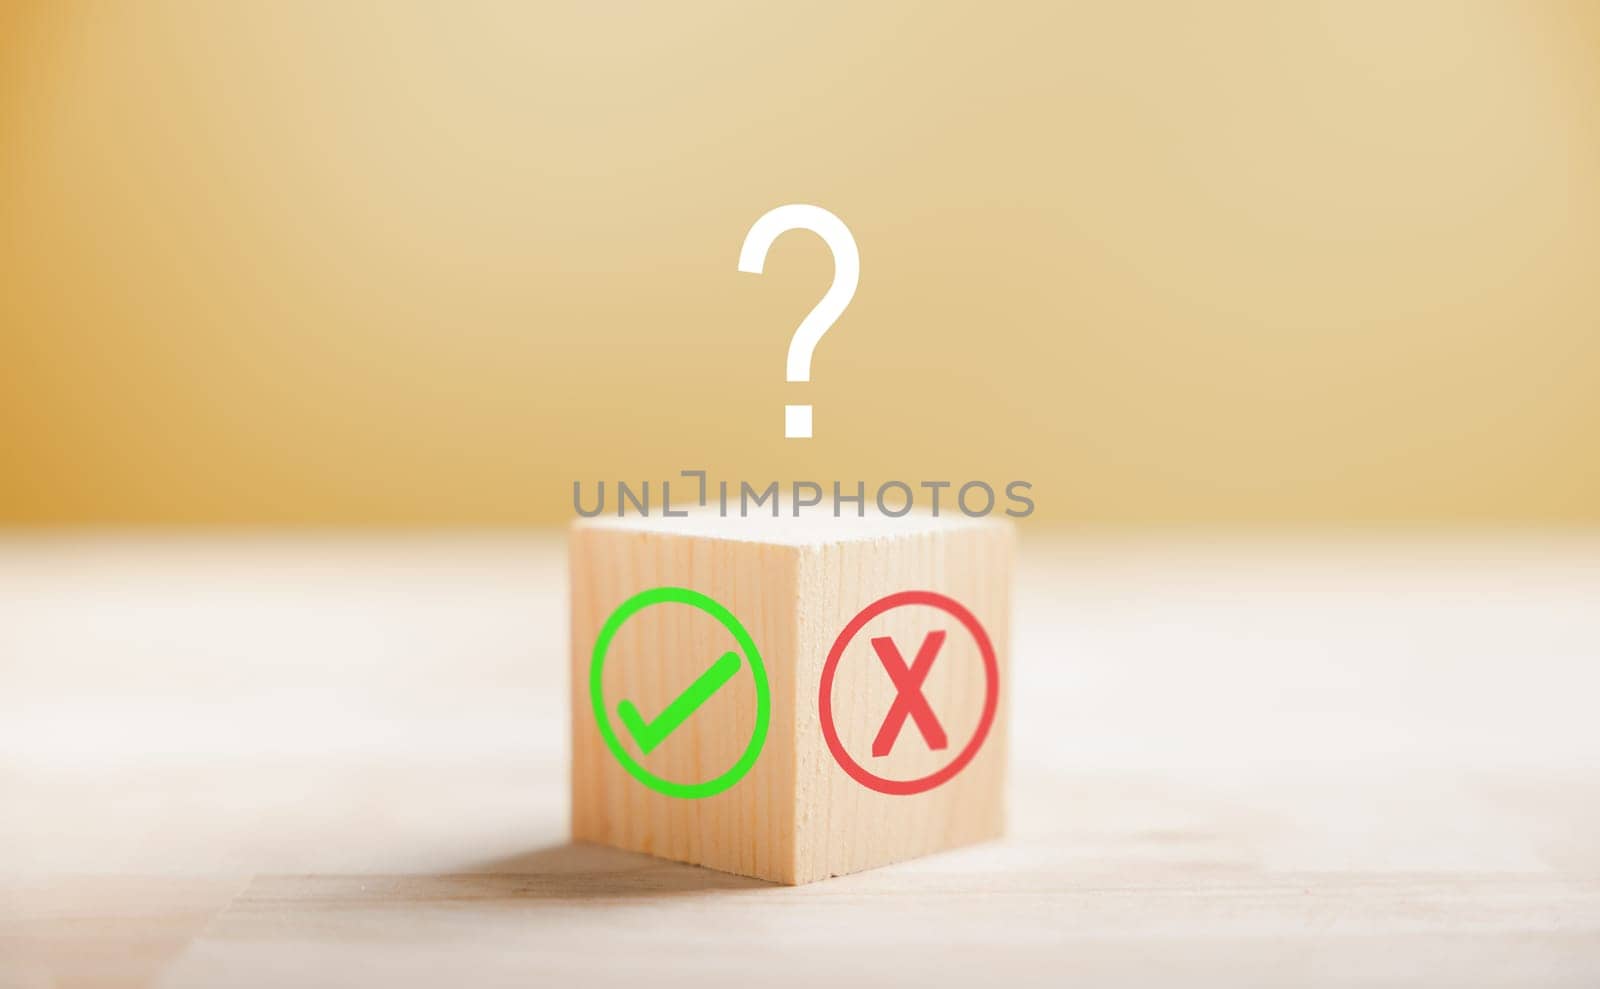 Green check mark and red x on wooden block signify decision making. Choice concept presented. Think With Yes Or No Choice. by Sorapop